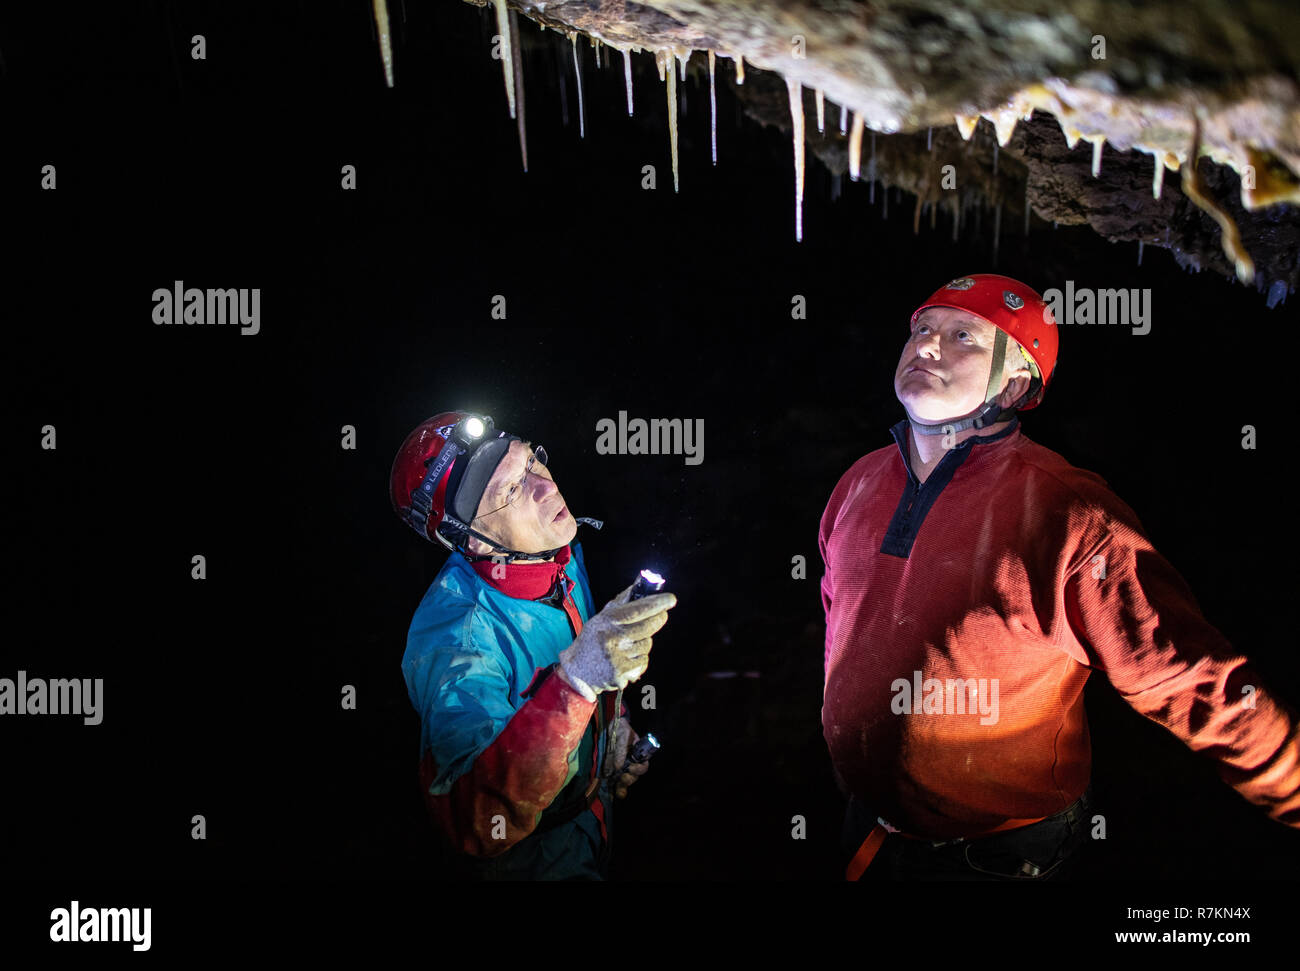 20 November 2018, North Rhine-Westphalia, Bad Wünnenberg: Cave explorers Andreas Schudelski (r) and Stefan Henscheid use their torches to illuminate the greenish-blue stalactites hanging from the ceiling of the Malachite Cathedral stalactite cave. The stalactite cave in the middle of a producing quarry has been saved for the time being. As a spokeswoman of the Paderborn district reported on 10.12.2018, an application by the quarry operator to dismantle the cave, which is under nature conservation, was rejected. Due to its enormous dimensions and the blue and green stalactites, the cave occupie Stock Photo